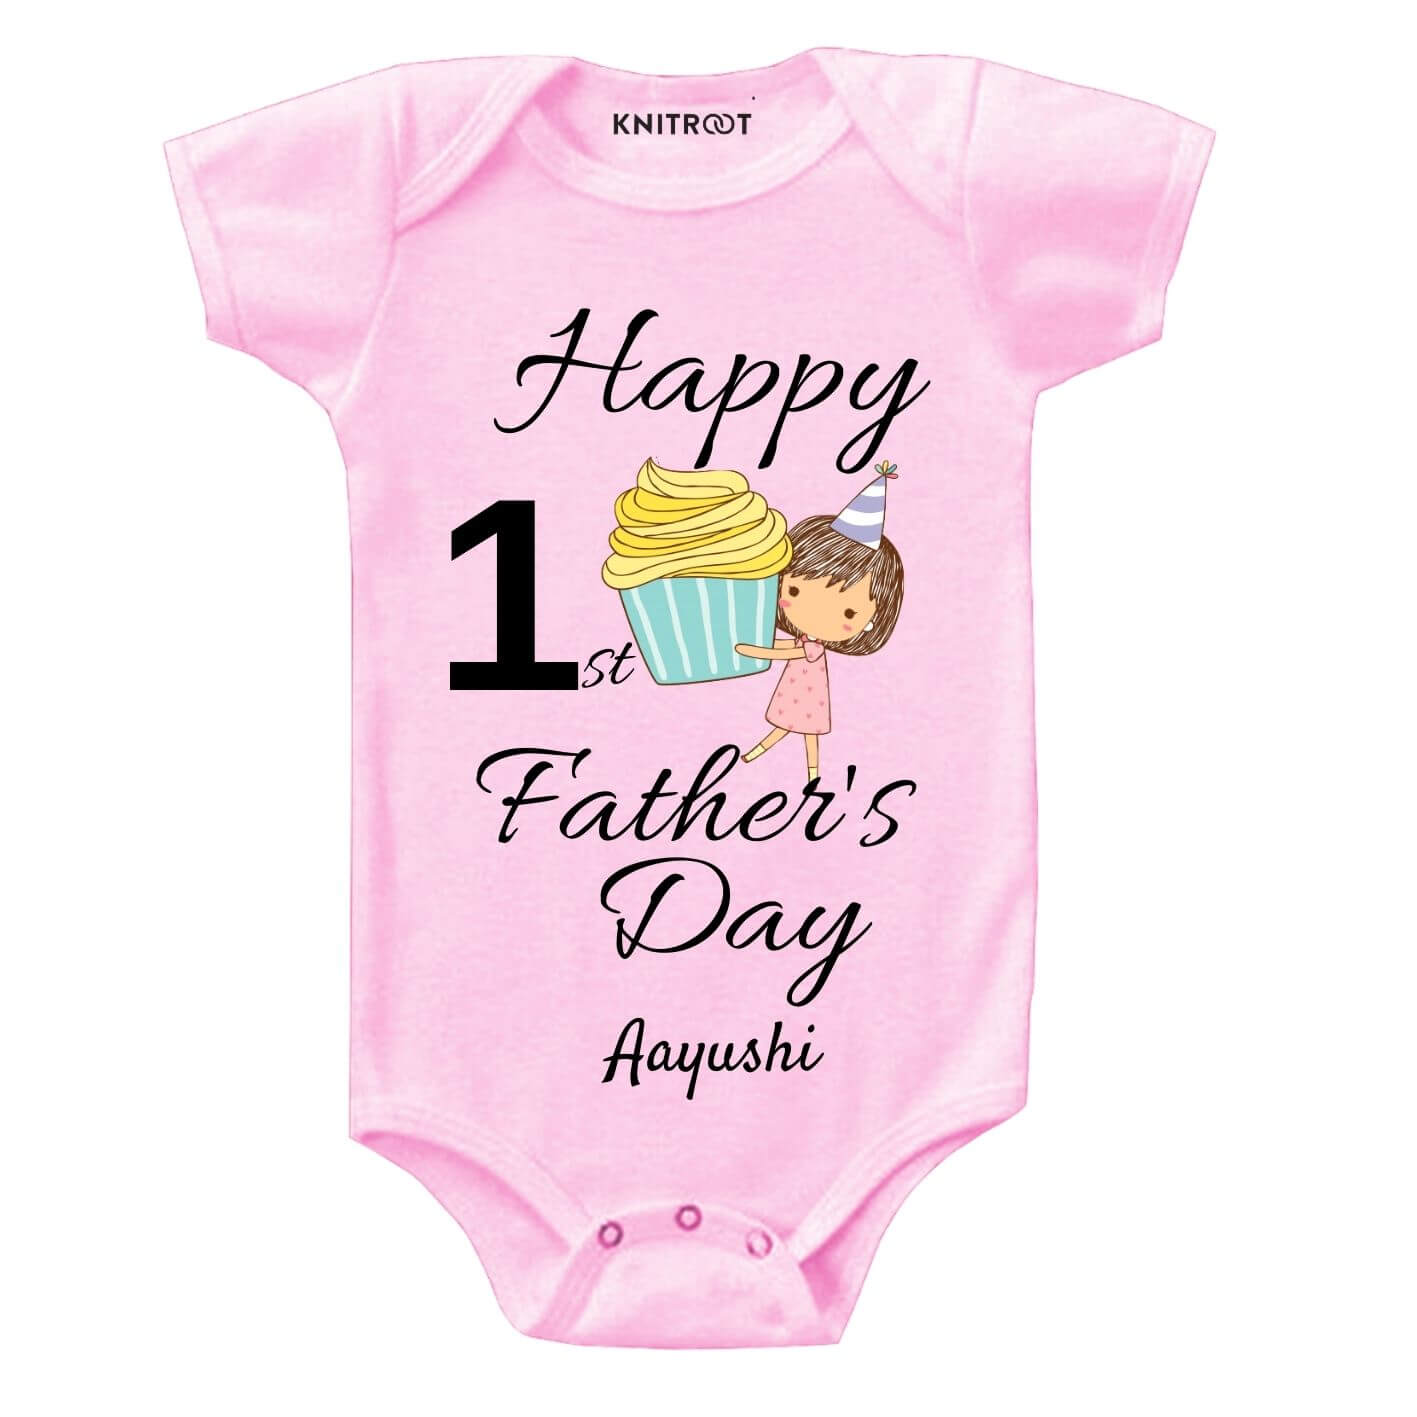 Happy 1st father's day-cupcake